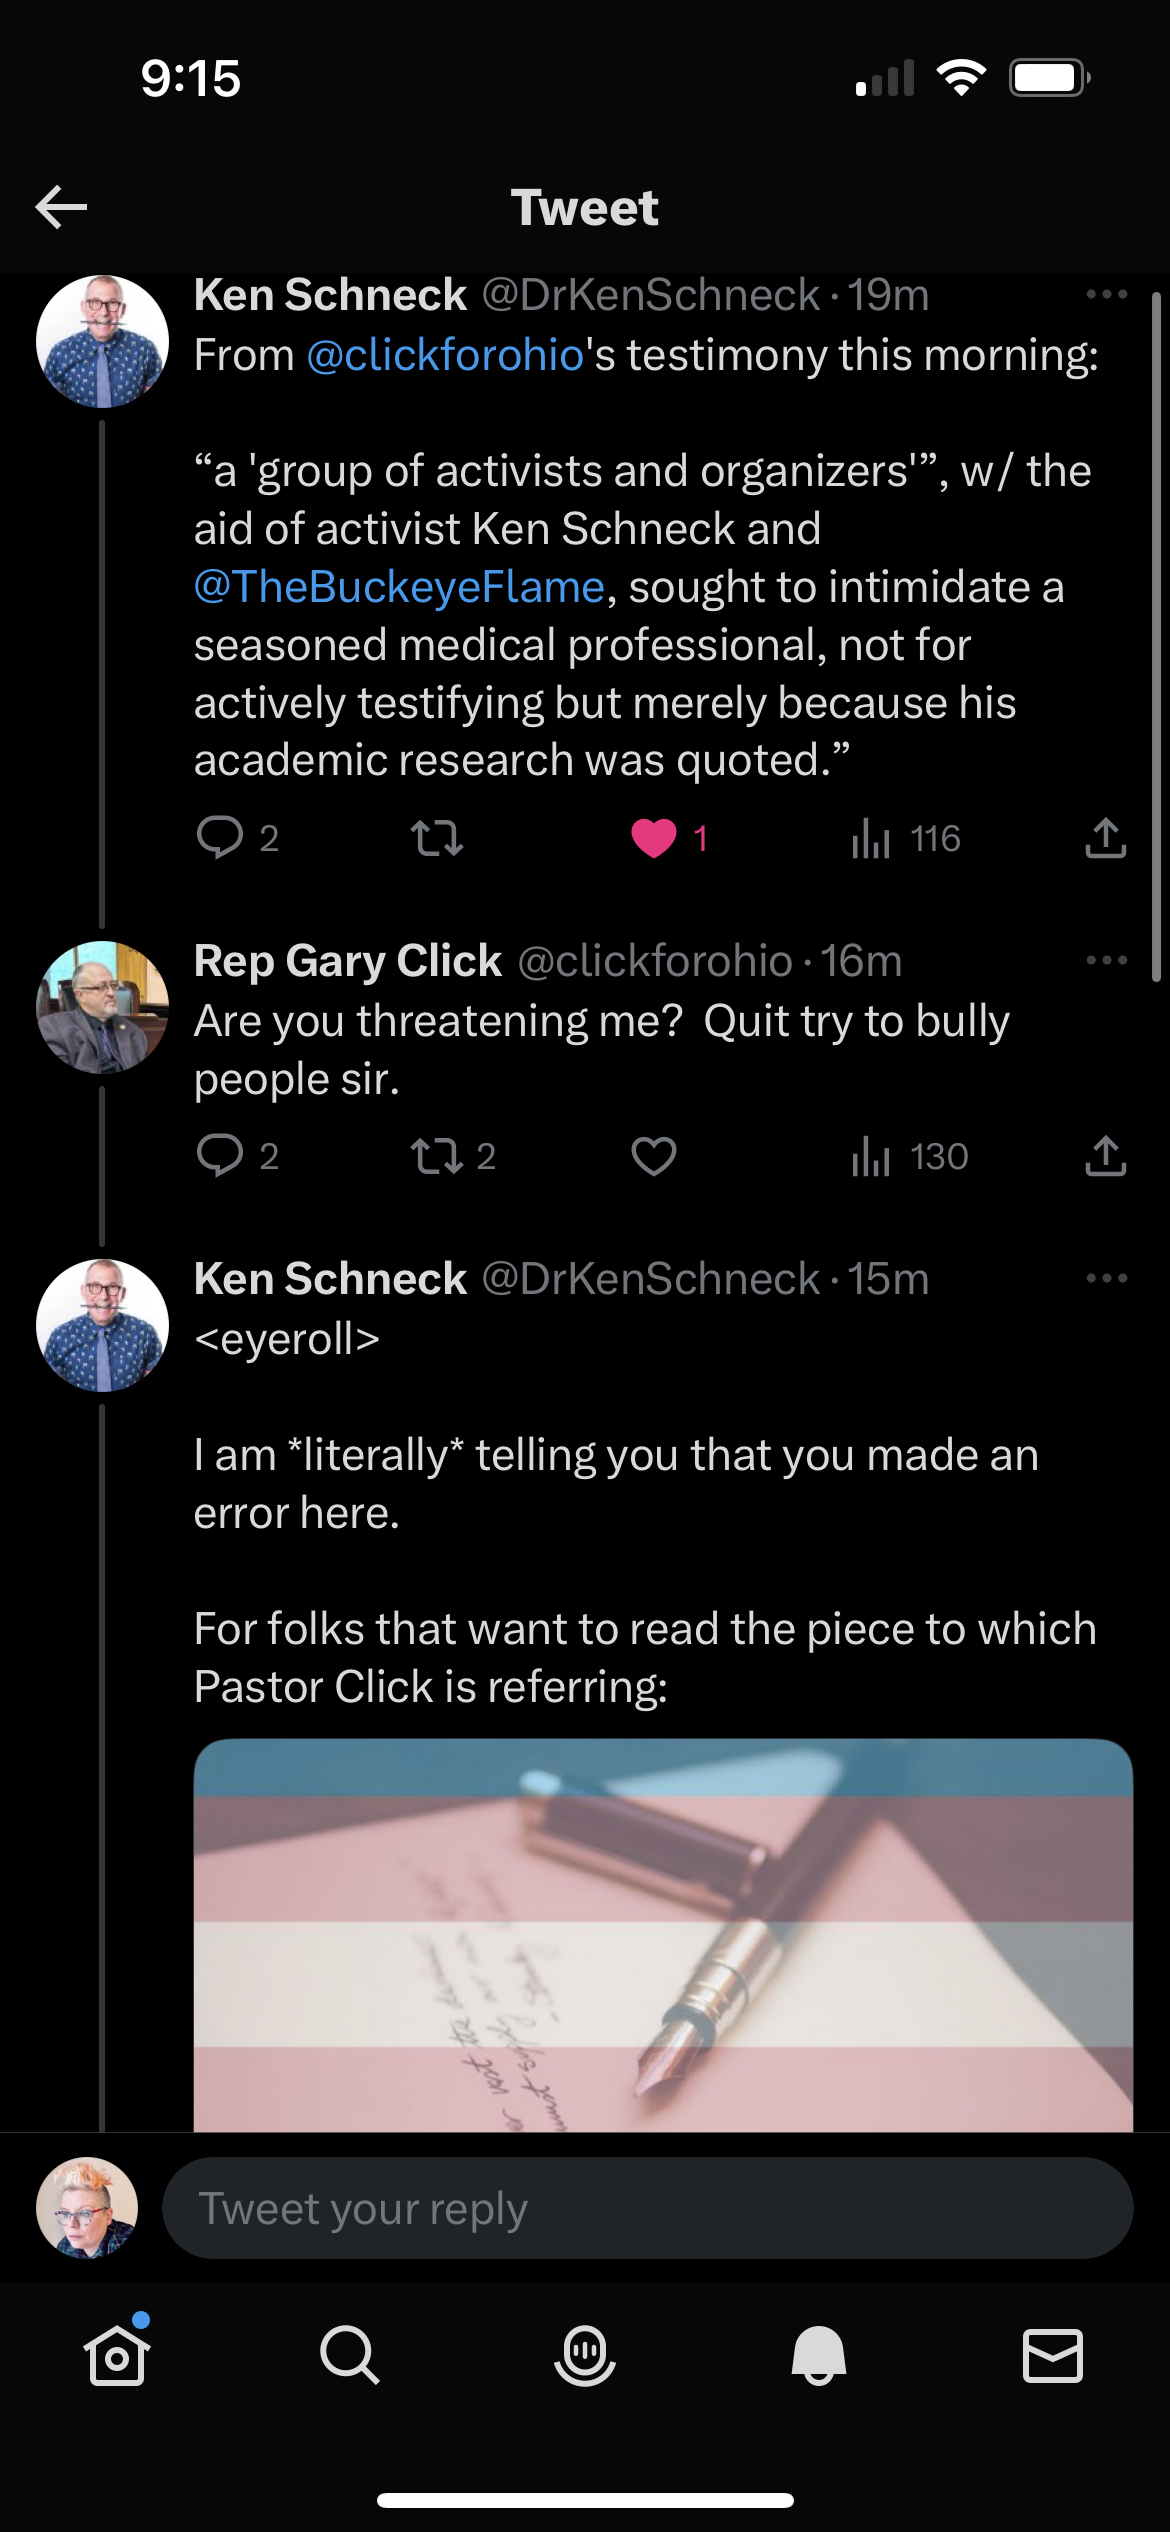 Image of interaction bt at click for ohio Gary Click's Twitter account and editor Dr. Ken Schneck, accusing him of bullying him